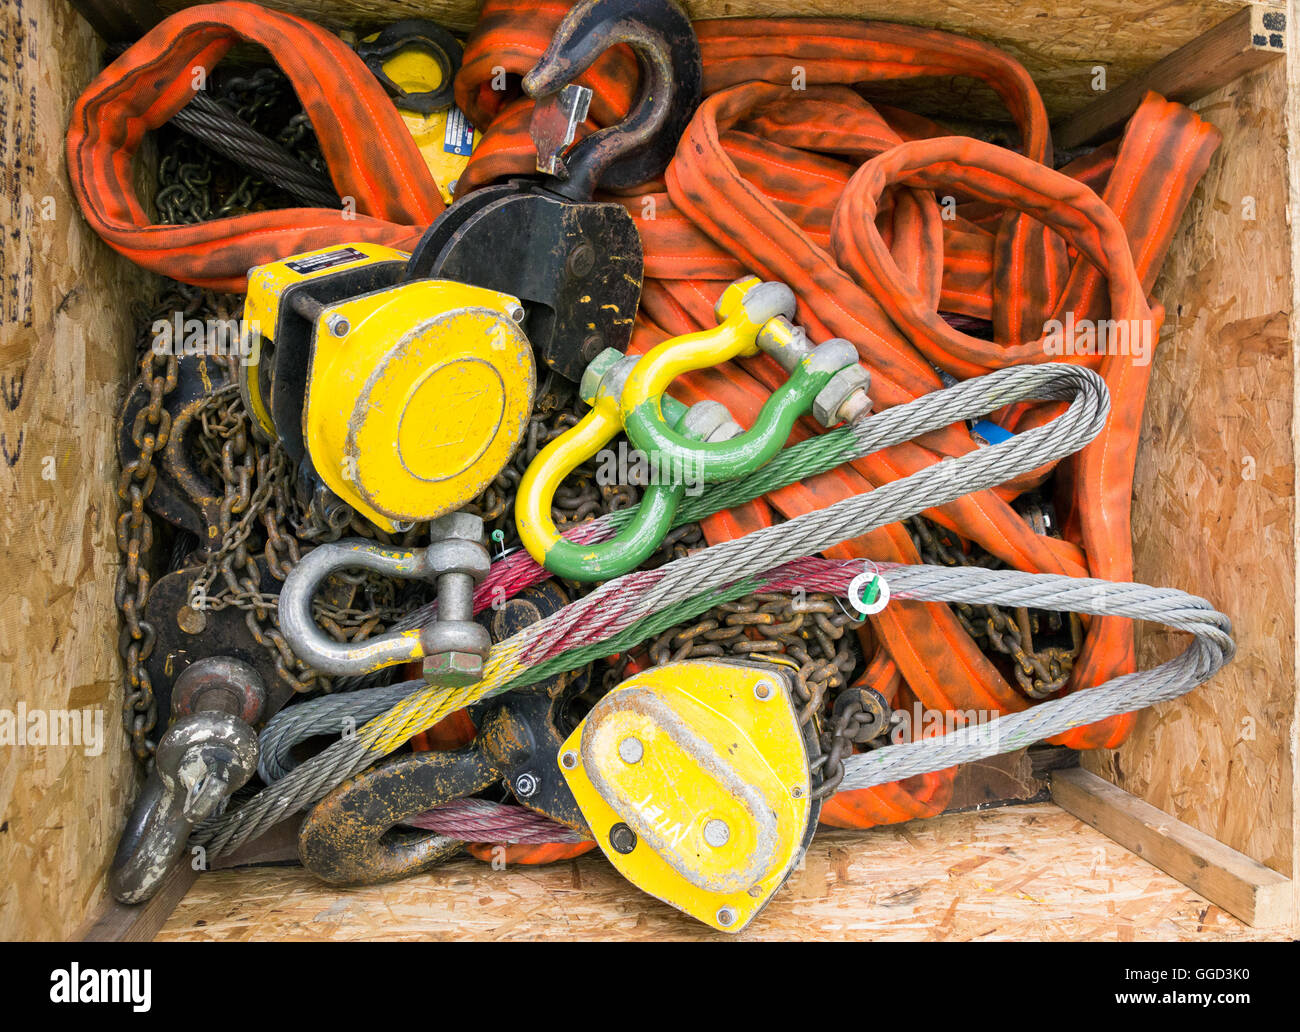 Pulleys and cables in a box Stock Photo